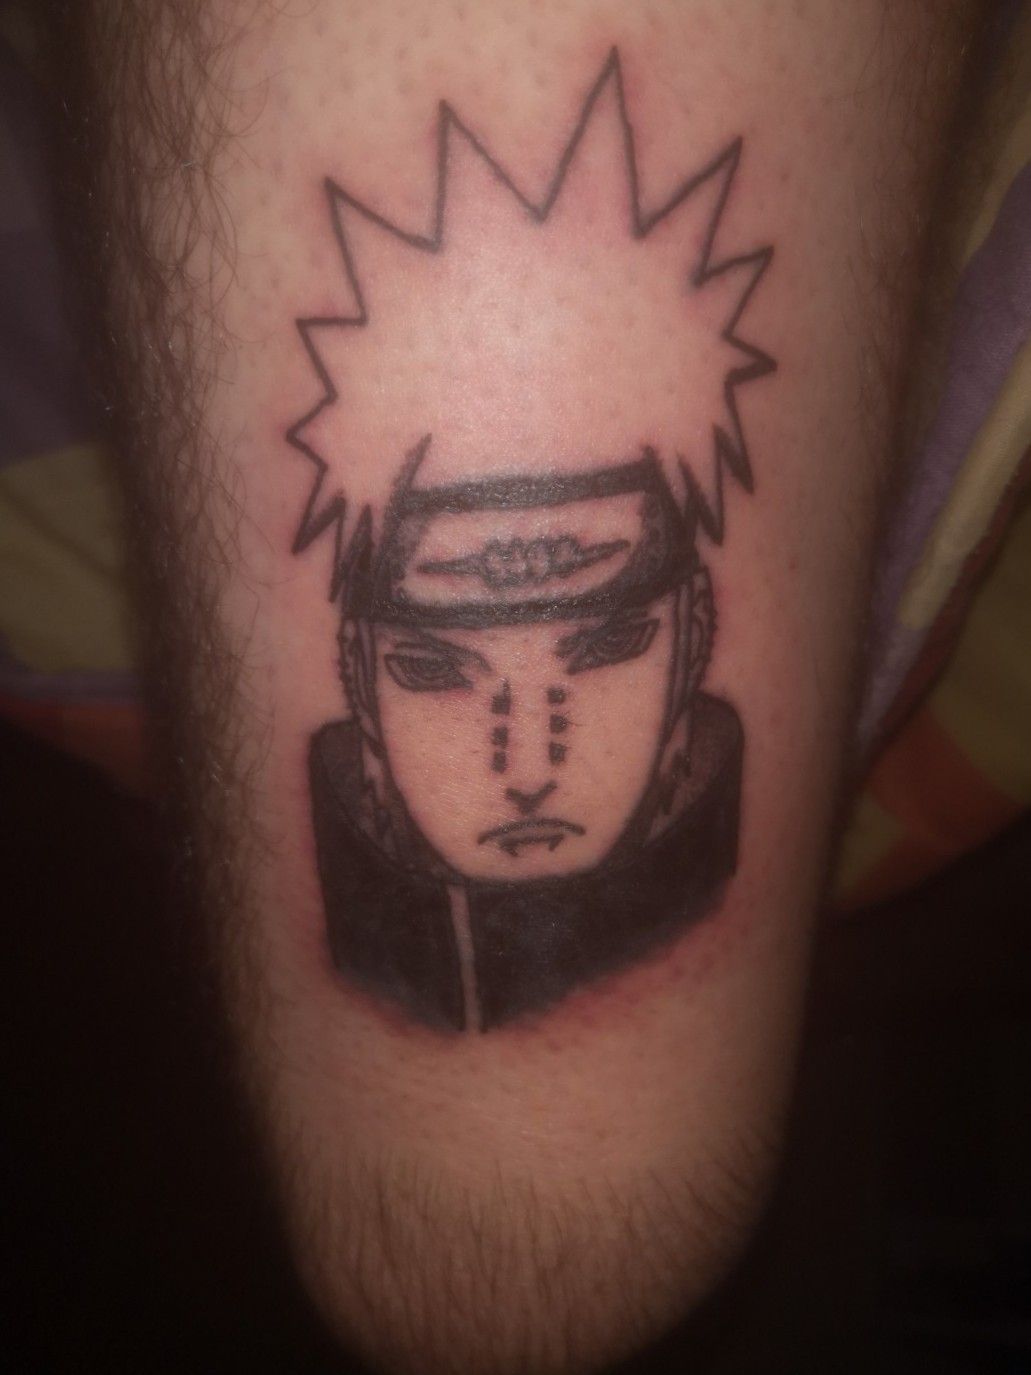 INKwell Studio Tattoos - PAIN from Naruto Shippuden. Thanks for looking -  Kenny Smith | Facebook